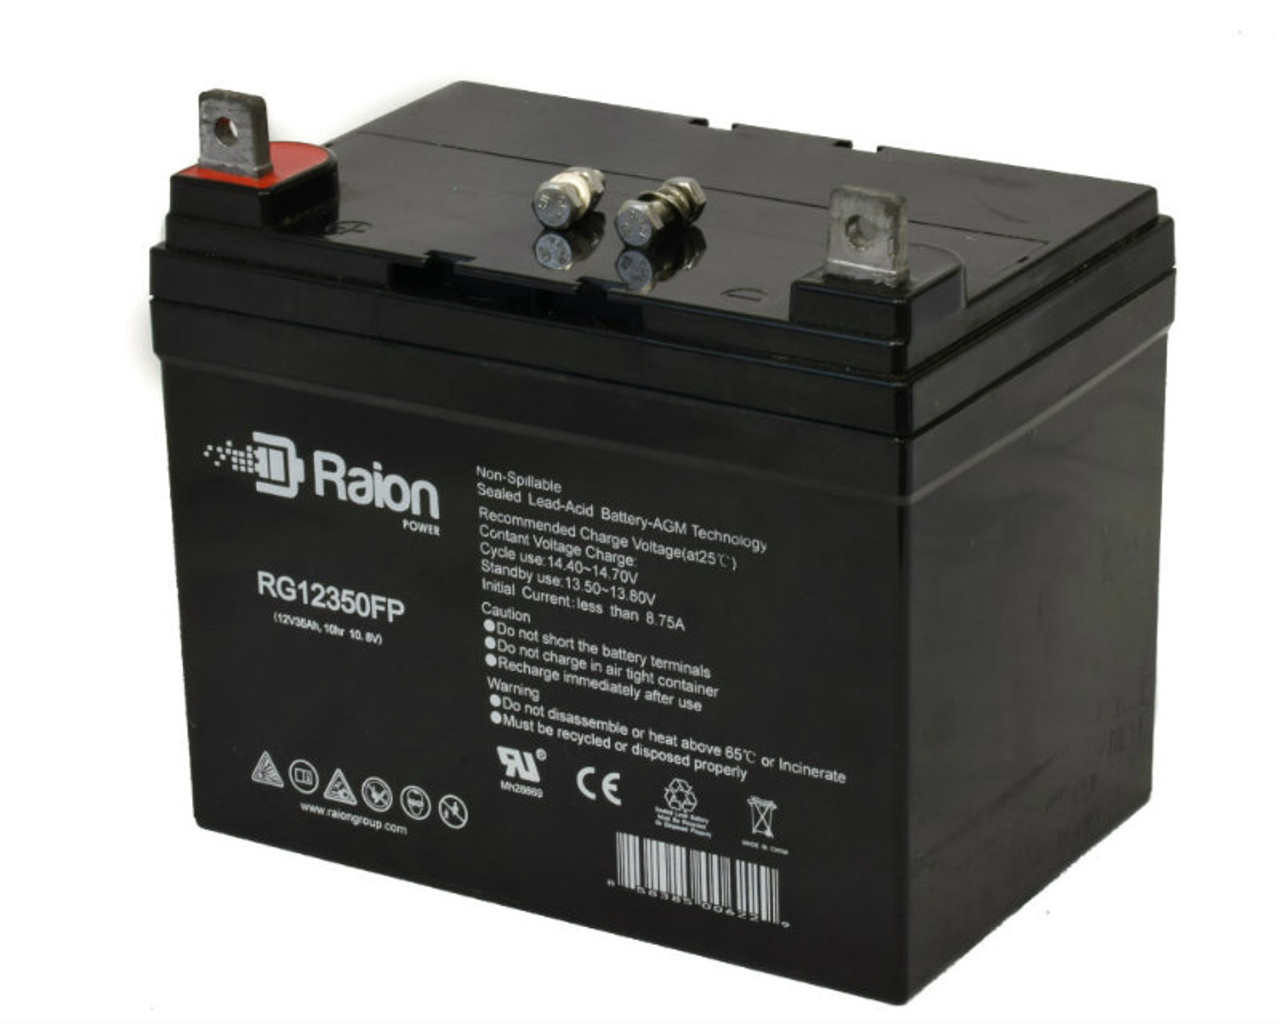 Raion Power Replacement 12V 35Ah RG12350FP Mobility Scooter Battery for Fortress Scooters 2200 FS